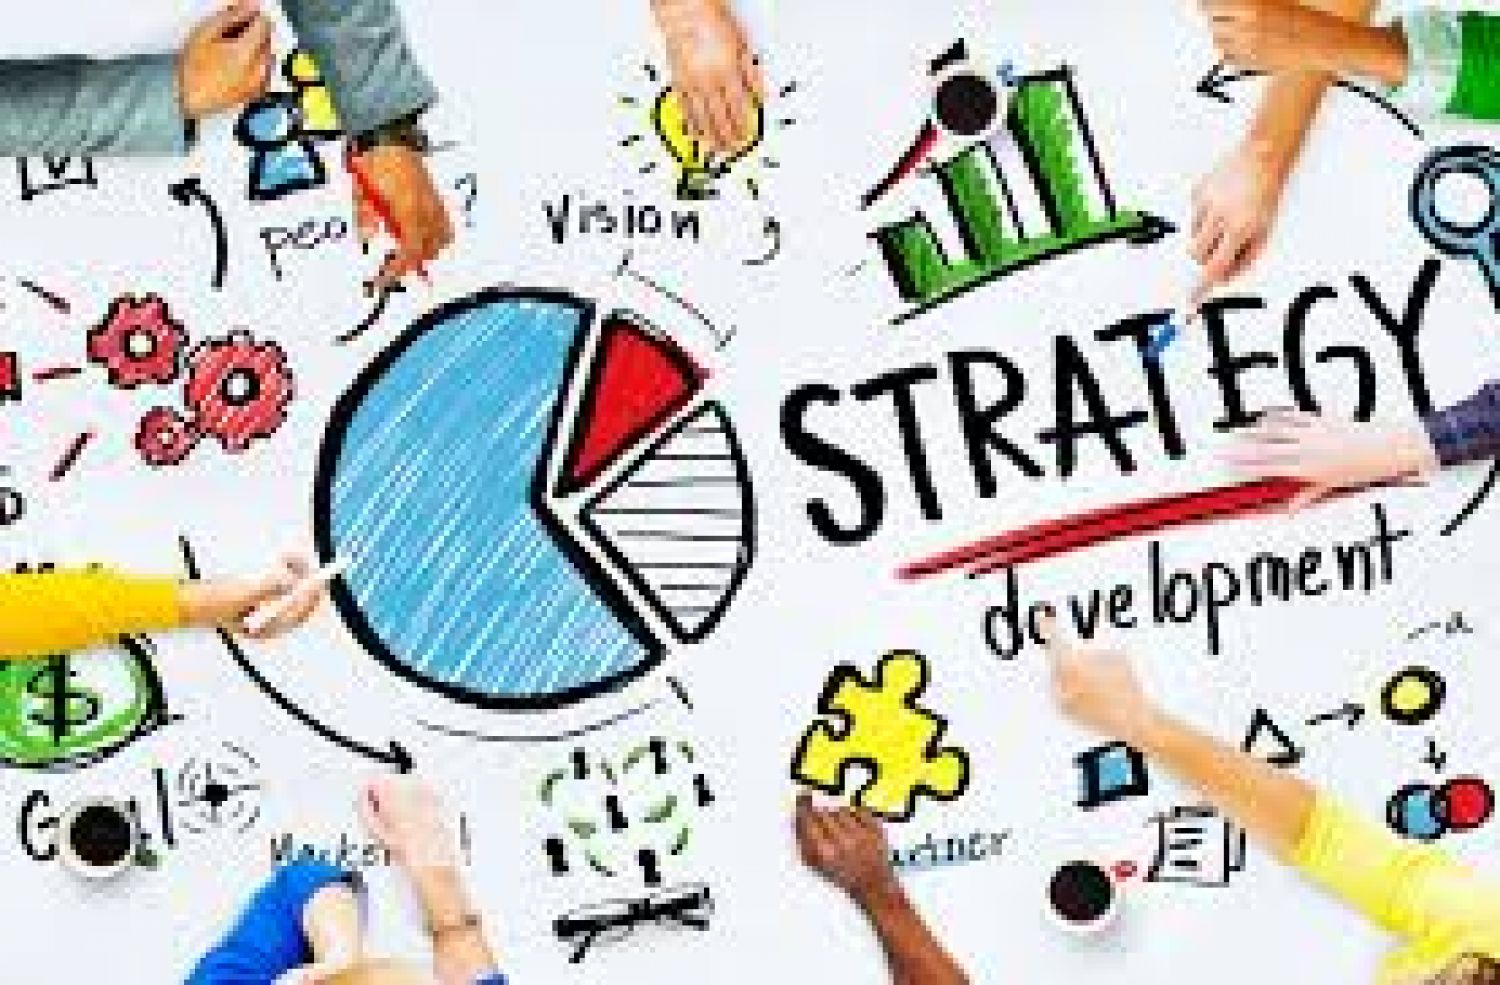 Various type of Business Strategy